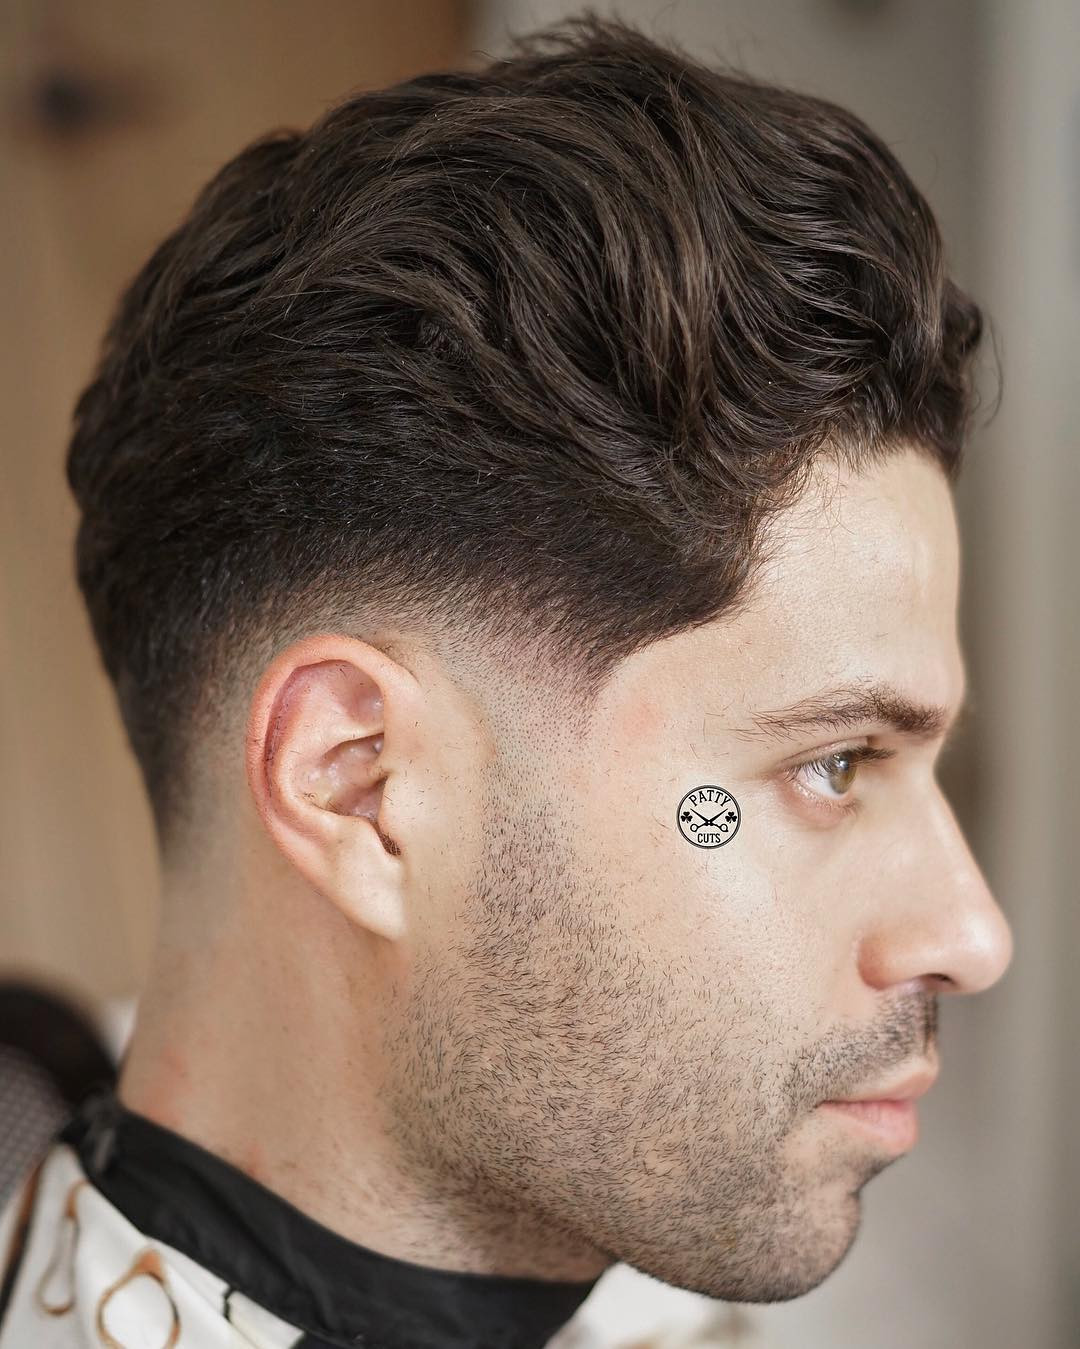 Mens Faded Hairstyles
 The Best Fade Haircuts For Men 33 Styles 2019